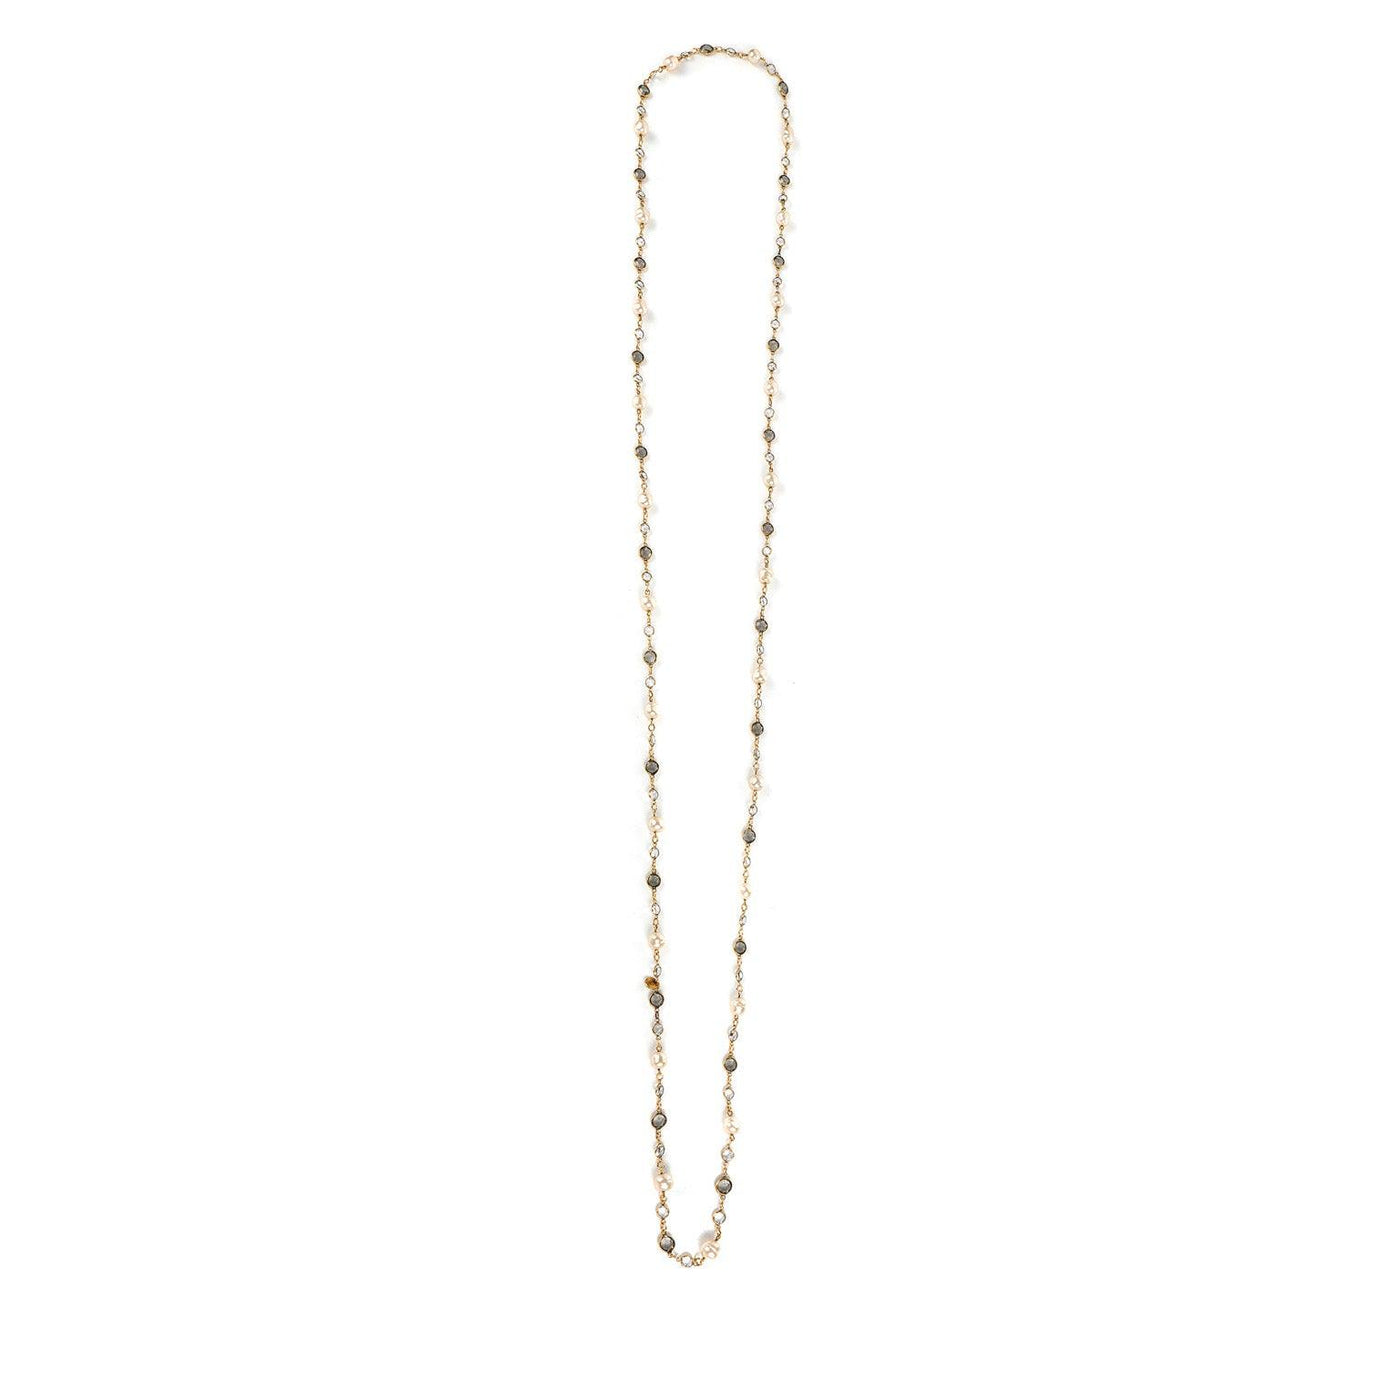 Chanel Pearl and Crystal Opera Length Necklace - Only Authentics